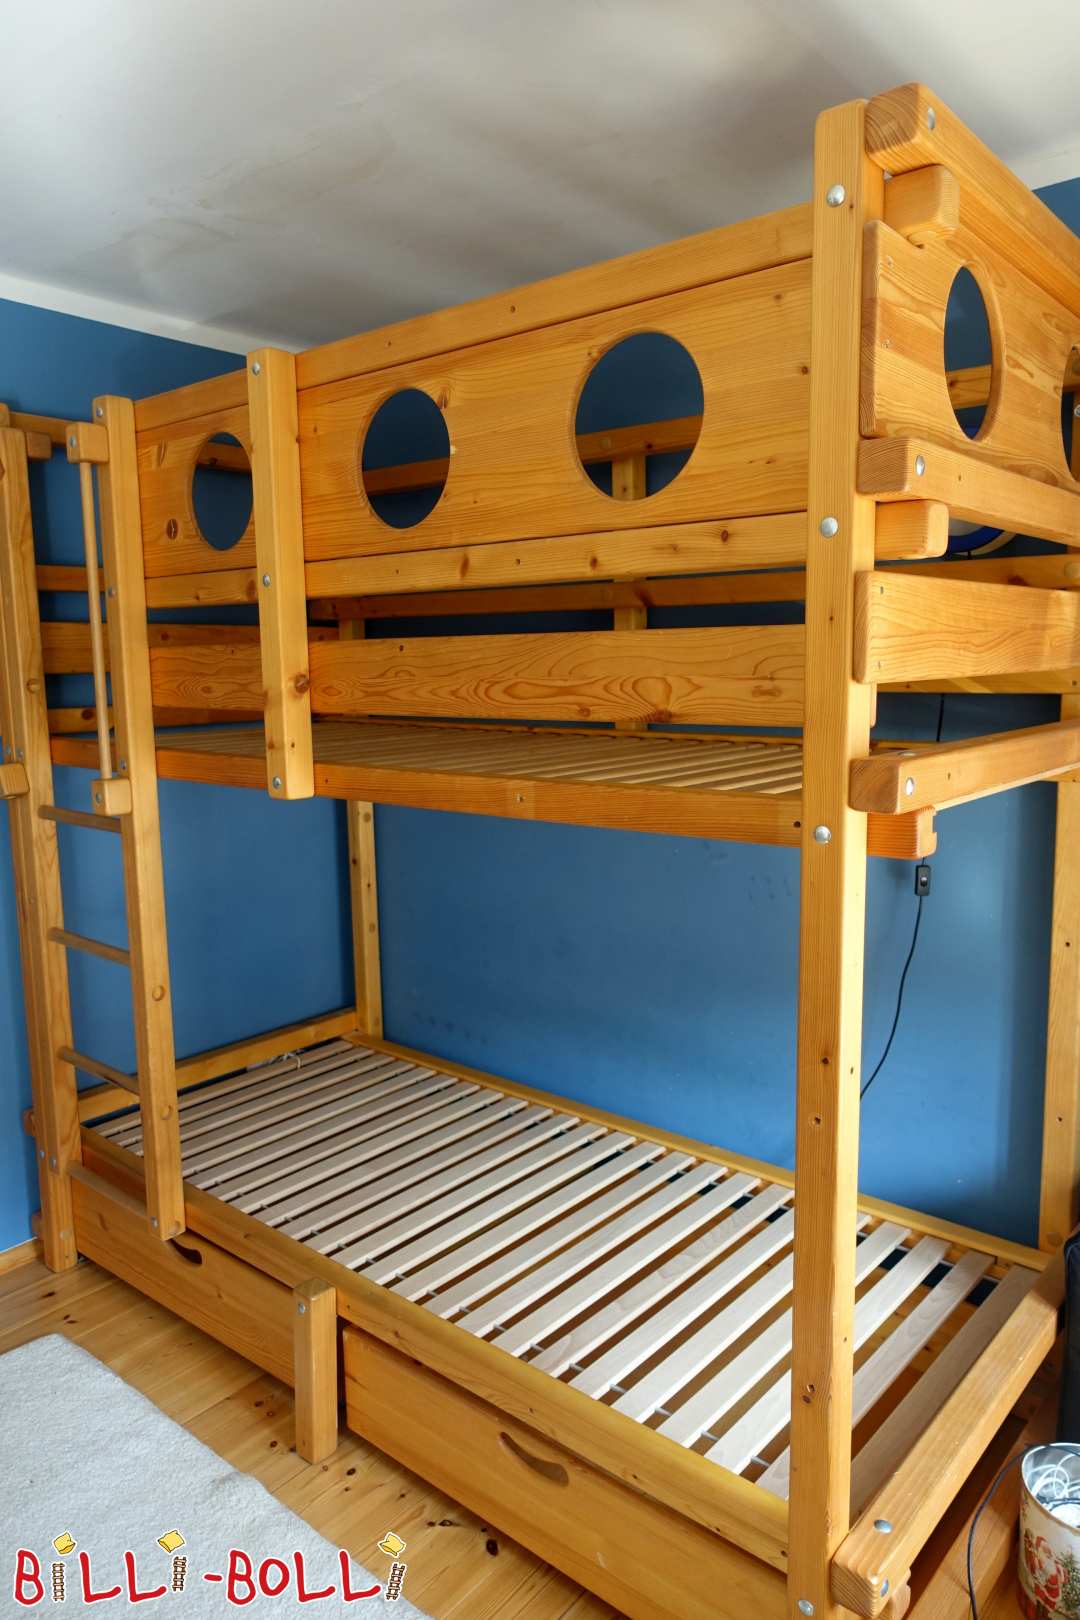 Billi-Bolli loft bed 90 cm x 200 cm in oiled spruce for sale (Category: second hand loft bed)